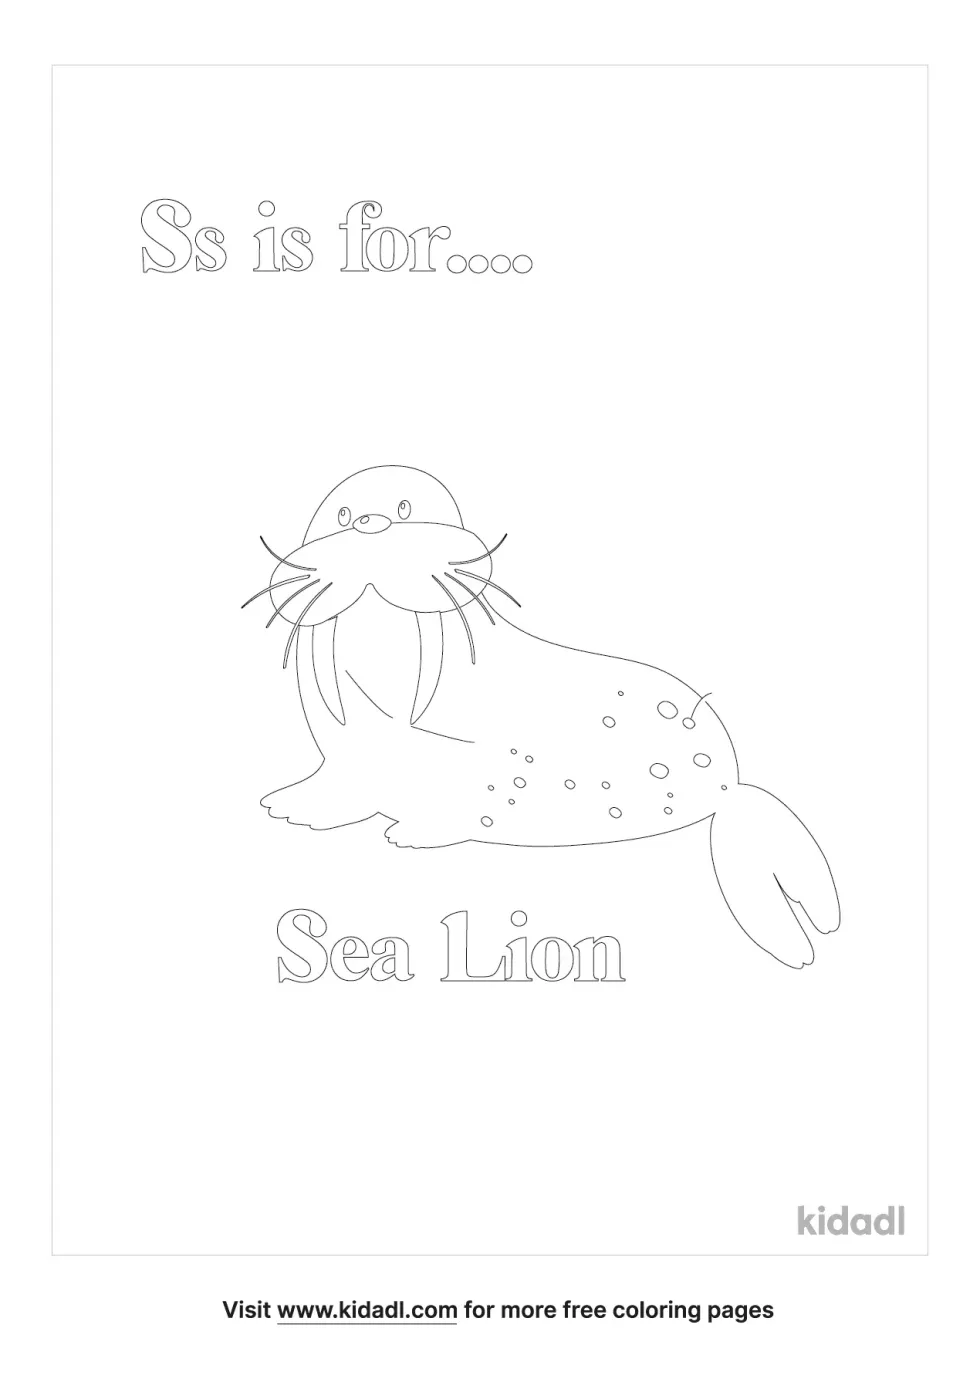 S Is For Sea Lion